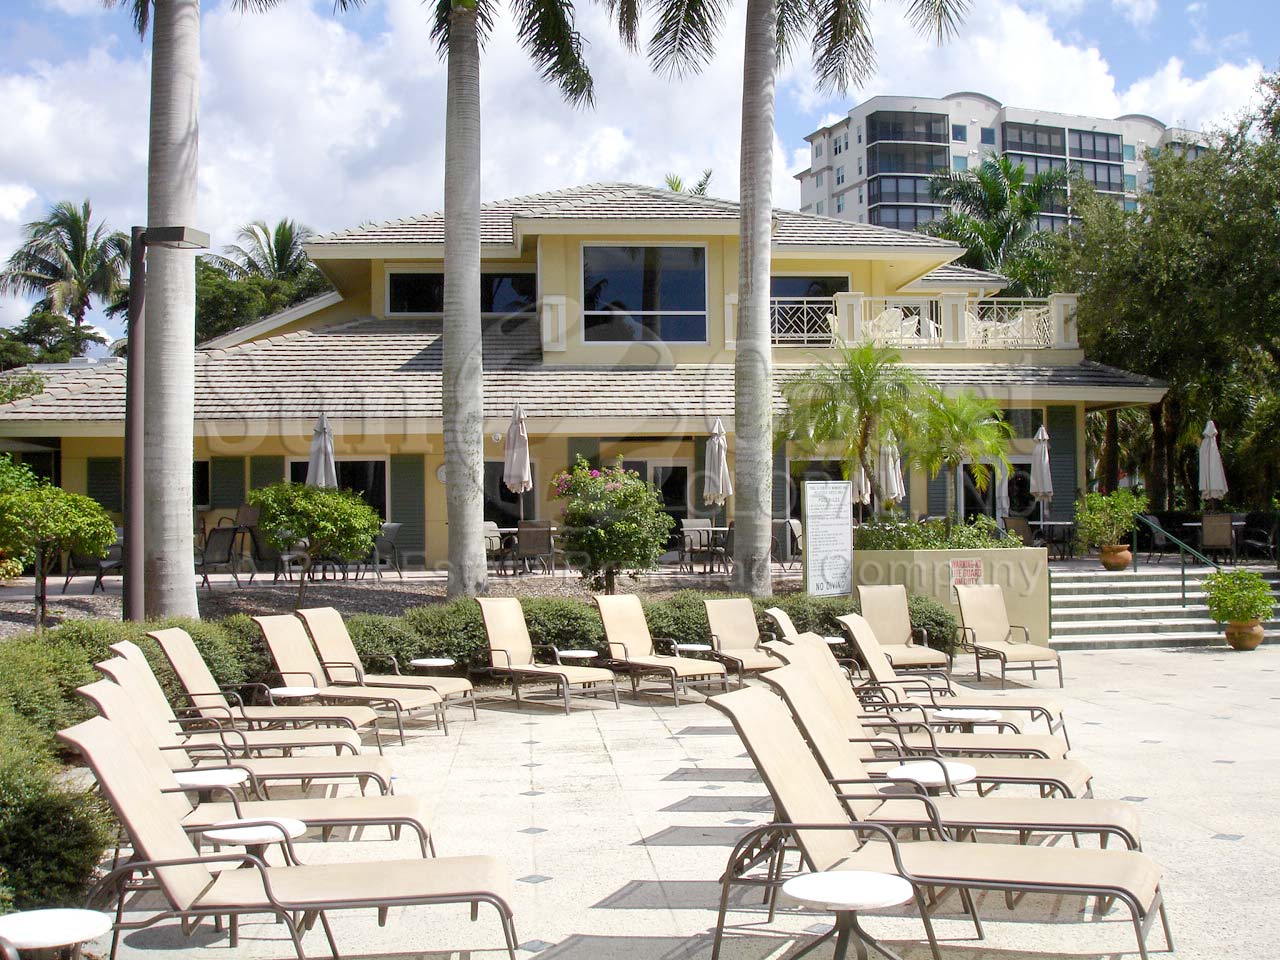 Tarpon Cove Yacht and Racquet Club Community Pool and Clubhouse